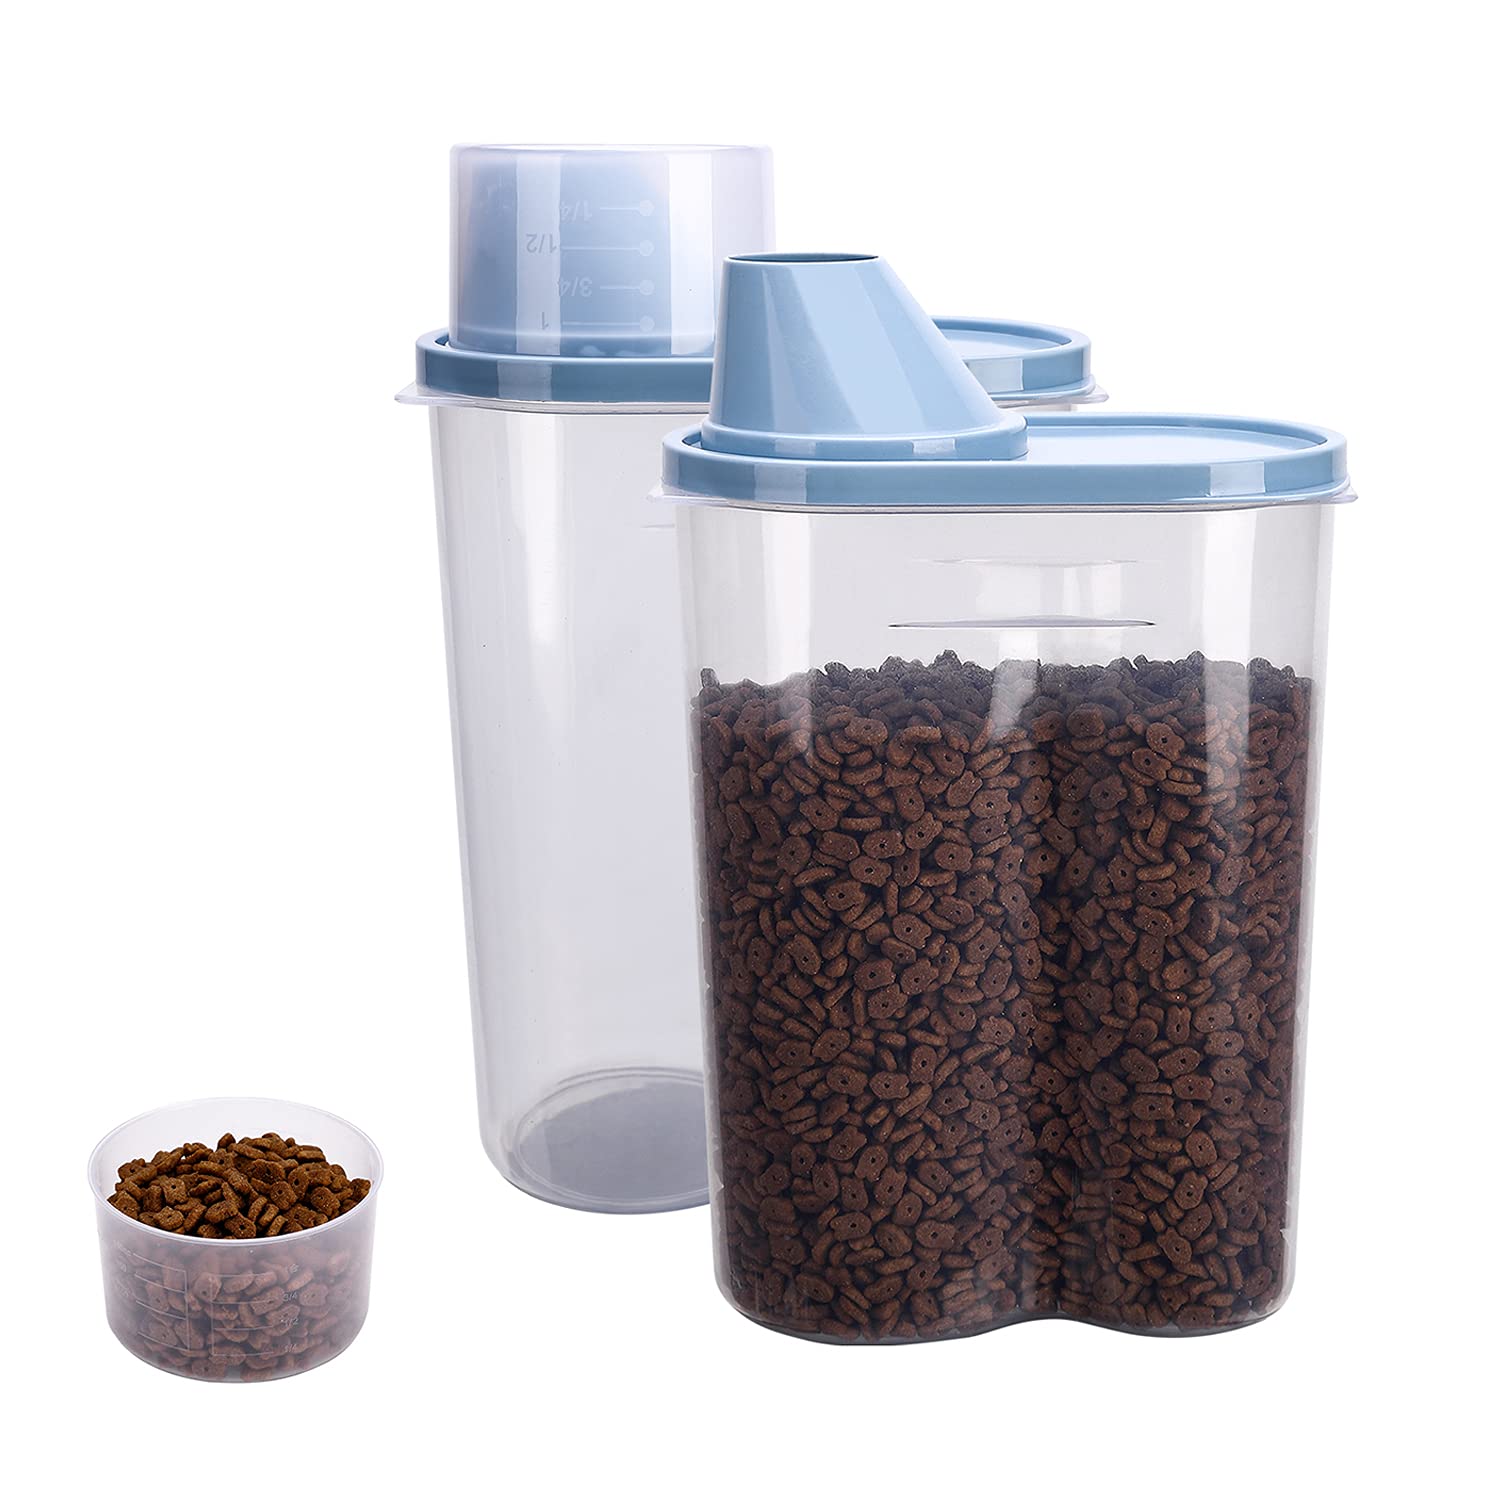 GreenJoy 2 Pack 2lb/2.5L Pet Food Storage Container with Measuring